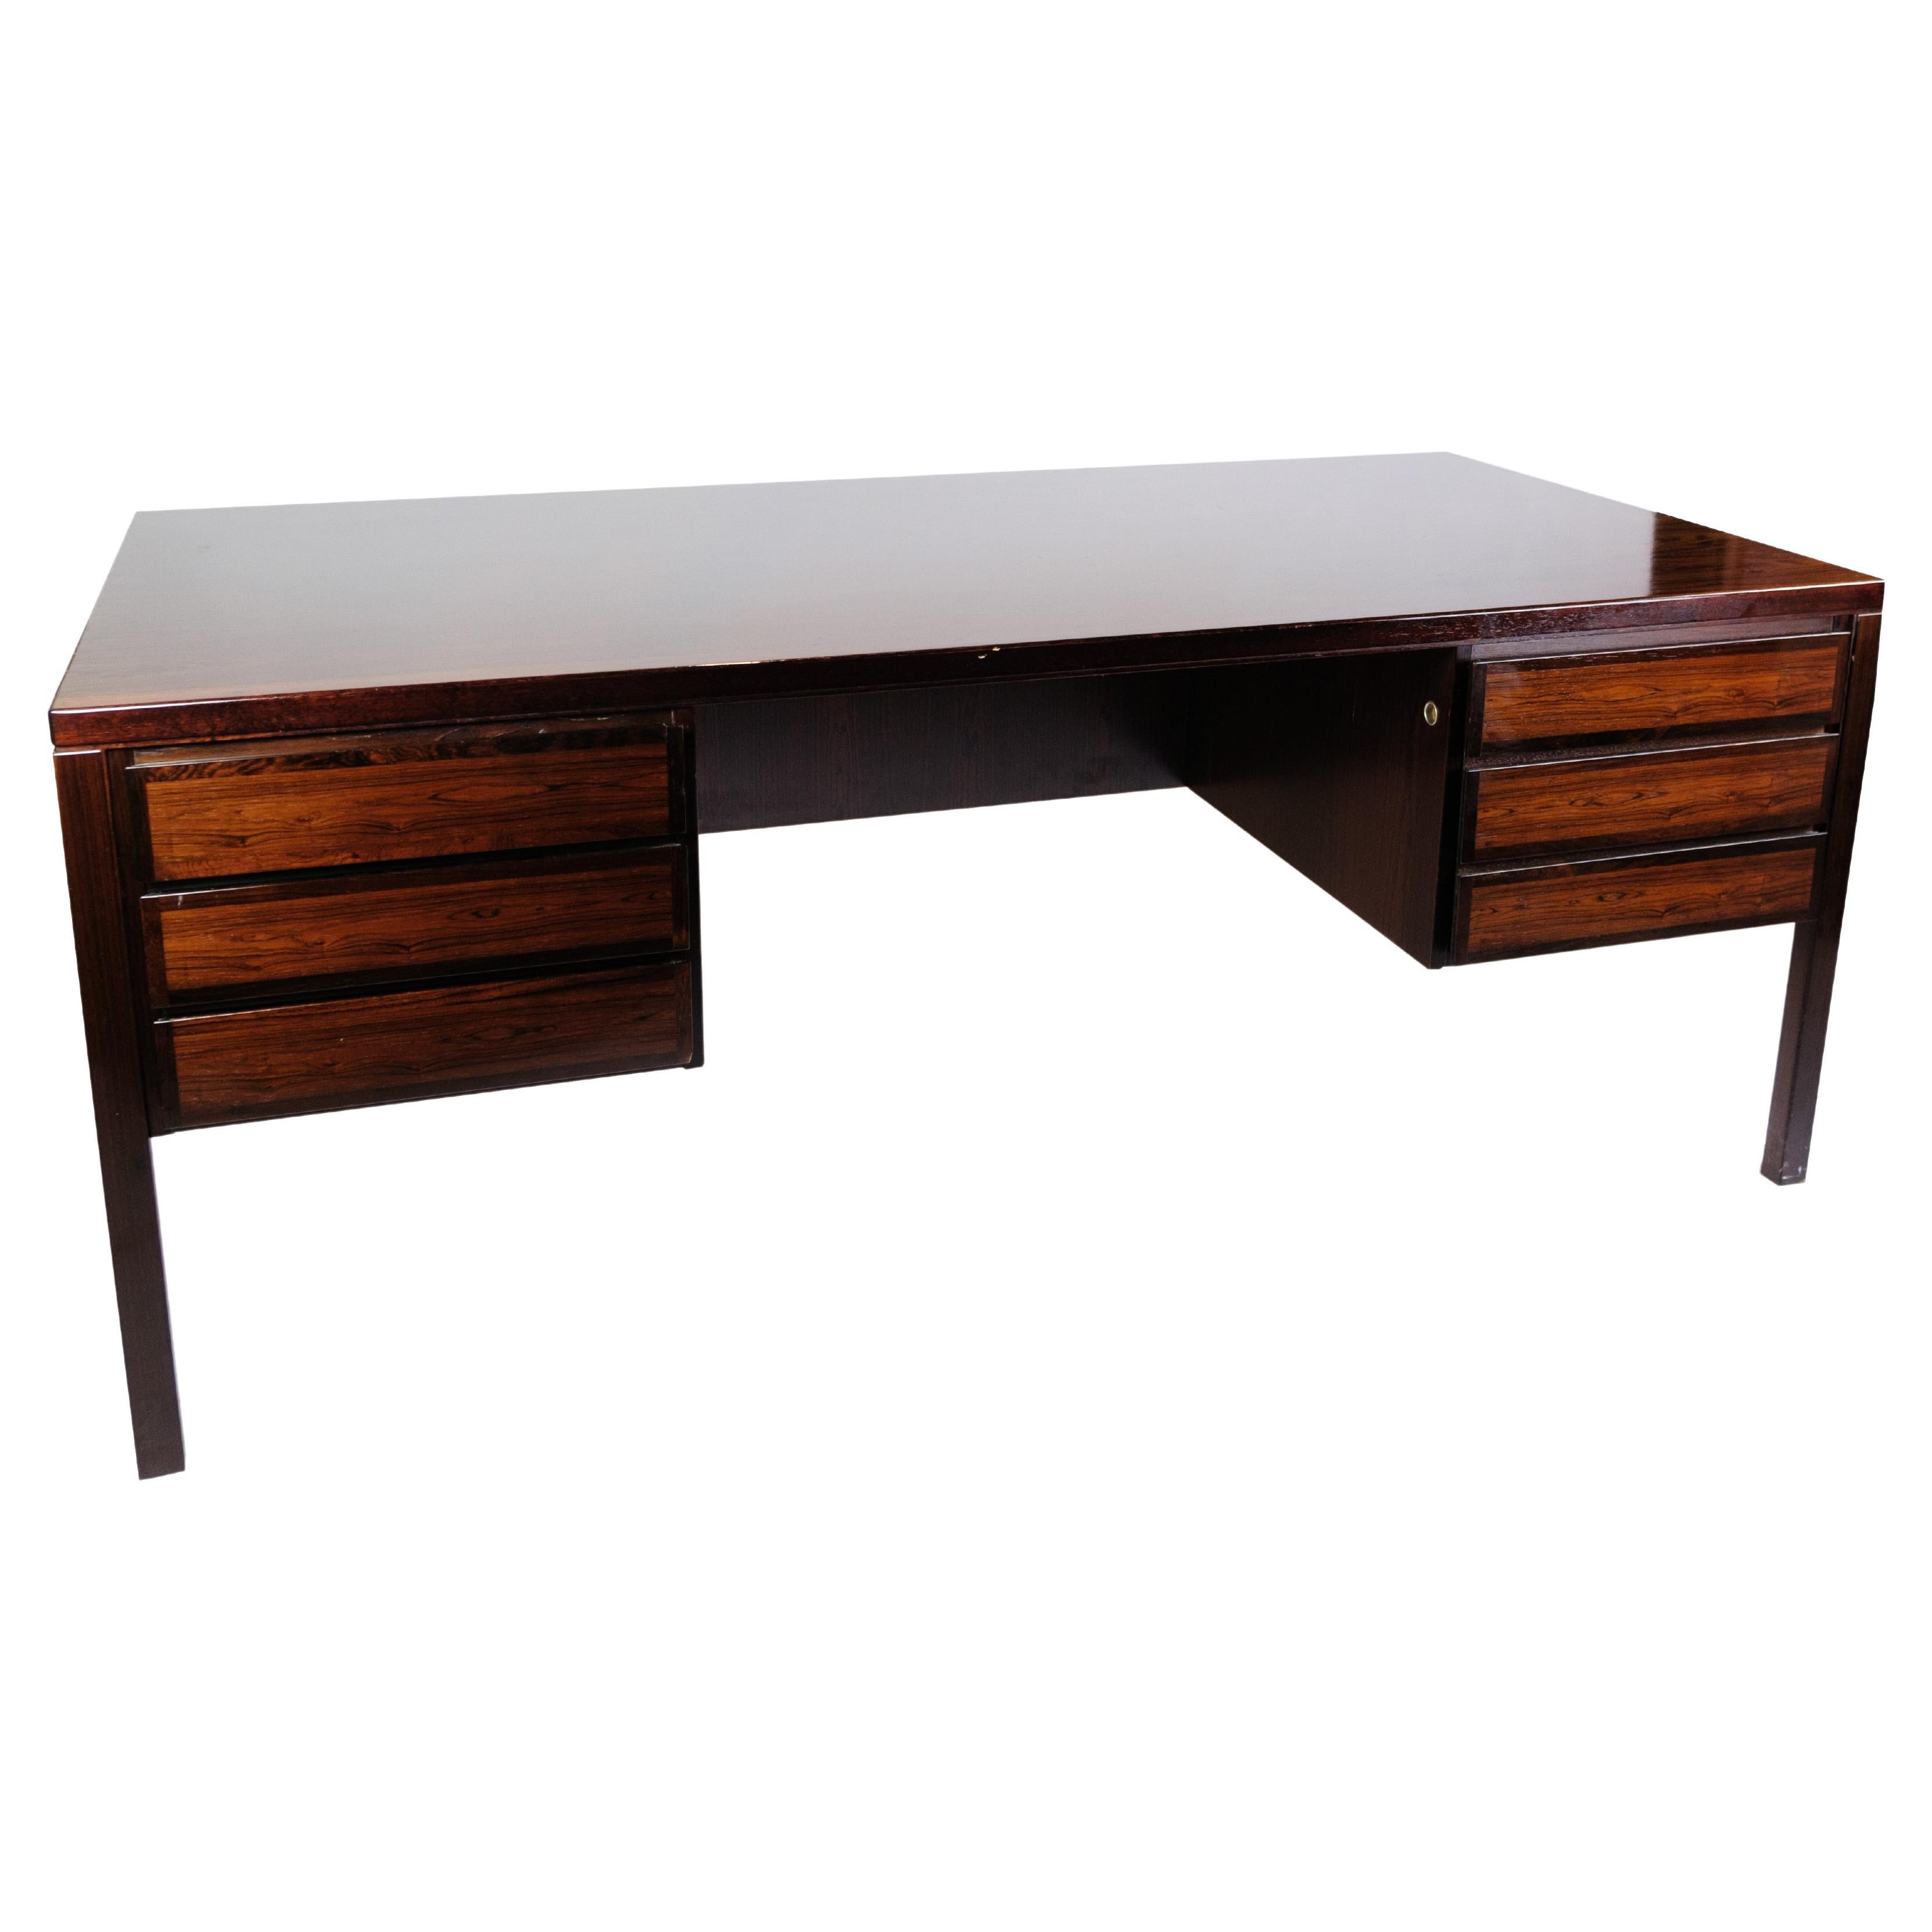 Desk Made In Rosewood By Omann Jun. Furniture Factory From 1960s For Sale